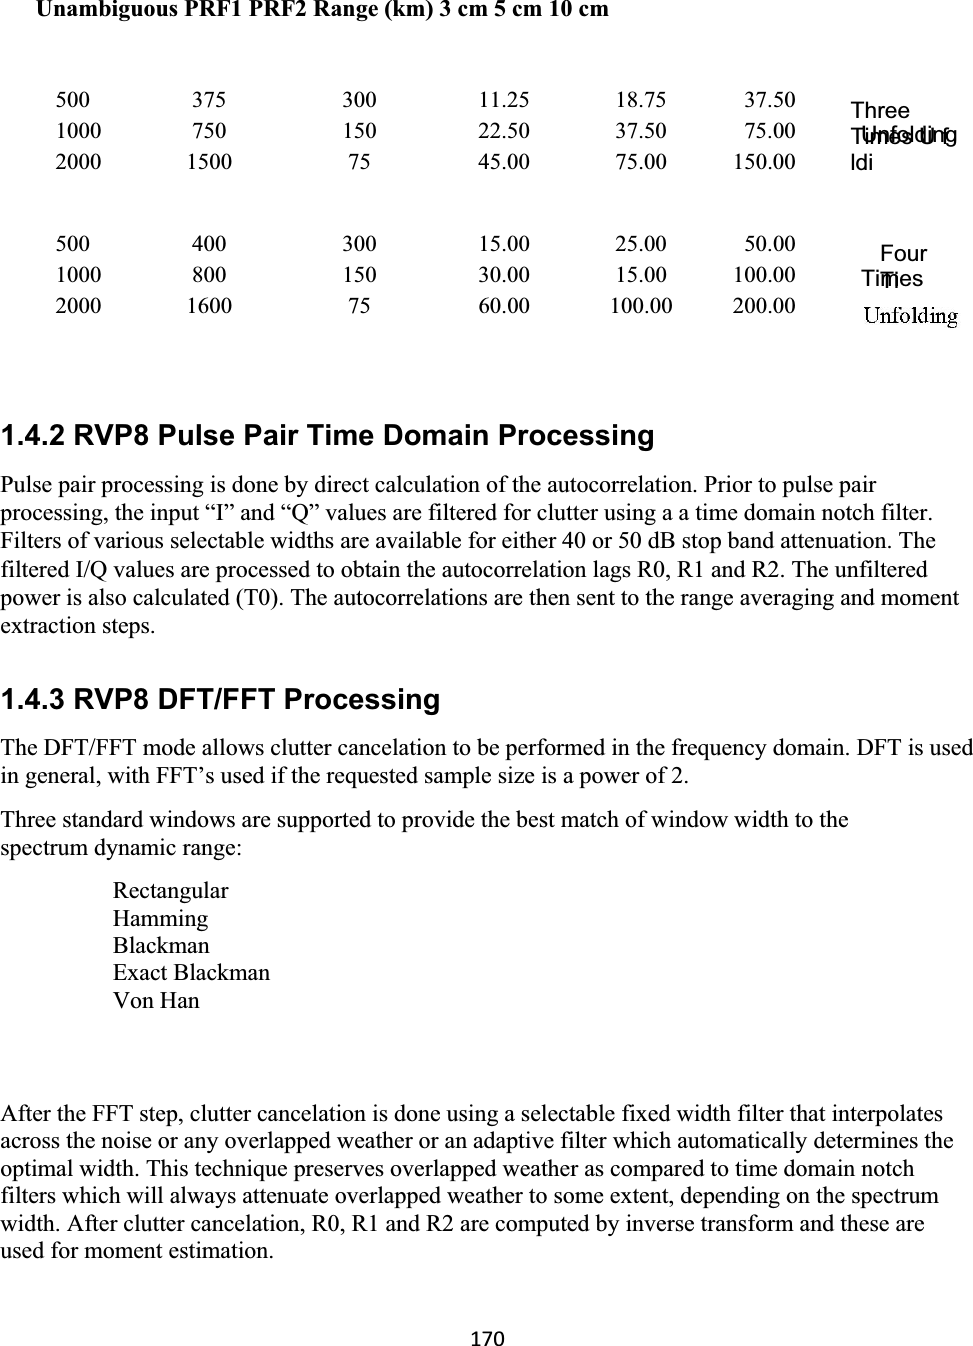 170Unambiguous PRF1 PRF2 Range (km) 3 cm 5 cm 10 cm ThreeTimes U f ldi UnfoldingFourTiTimes1.4.2 RVP8 Pulse Pair Time Domain Processing Pulse pair processing is done by direct calculation of the autocorrelation. Prior to pulse pair processing, the input “I” and “Q” values are filtered for clutter using a a time domain notch filter. Filters of various selectable widths are available for either 40 or 50 dB stop band attenuation. The filtered I/Q values are processed to obtain the autocorrelation lags R0, R1 and R2. The unfiltered power is also calculated (T0). The autocorrelations are then sent to the range averaging and moment extraction steps.  1.4.3 RVP8 DFT/FFT Processing The DFT/FFT mode allows clutter cancelation to be performed in the frequency domain. DFT is used in general, with FFT’s used if the requested sample size is a power of 2.  Three standard windows are supported to provide the best match of window width to the spectrum dynamic range:  RectangularHamming  Blackman  Exact Blackman  Von HanAfter the FFT step, clutter cancelation is done using a selectable fixed width filter that interpolates across the noise or any overlapped weather or an adaptive filter which automatically determines the optimal width. This technique preserves overlapped weather as compared to time domain notch filters which will always attenuate overlapped weather to some extent, depending on the spectrum width. After clutter cancelation, R0, R1 and R2 are computed by inverse transform and these are used for moment estimation.  500   375   300   11.25   18.75   37.50  1000   750   150   22.50   37.50   75.00  2000   1500   75   45.00   75.00   150.00  500   400   300   15.00   25.00   50.00  1000   800   150   30.00   15.00   100.00  2000   1600   75   60.00   100.00   200.00  